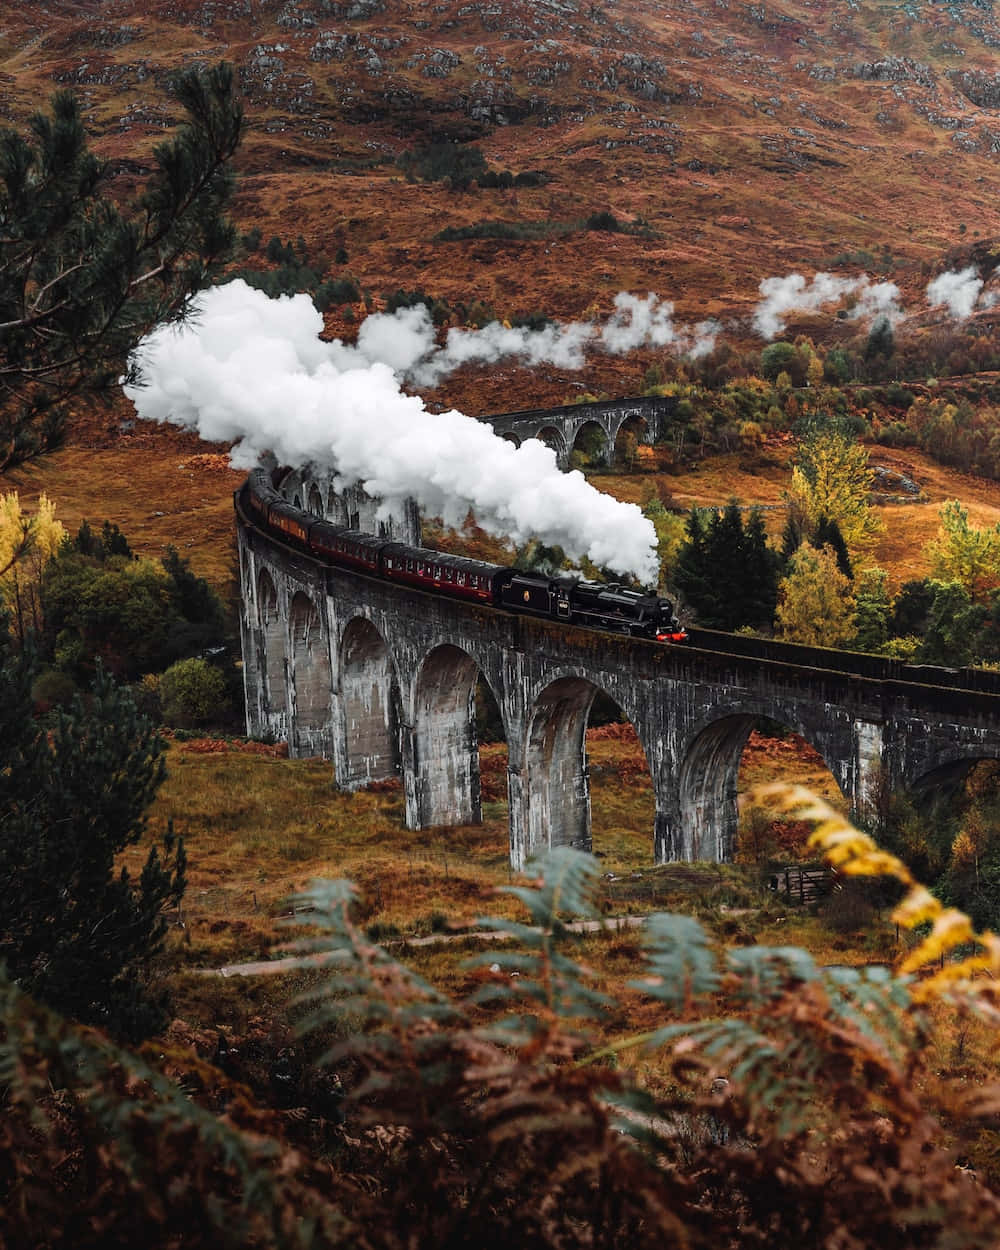 "The Hogwarts Express - The Most Magical Way To Reach Hogwarts!" Wallpaper